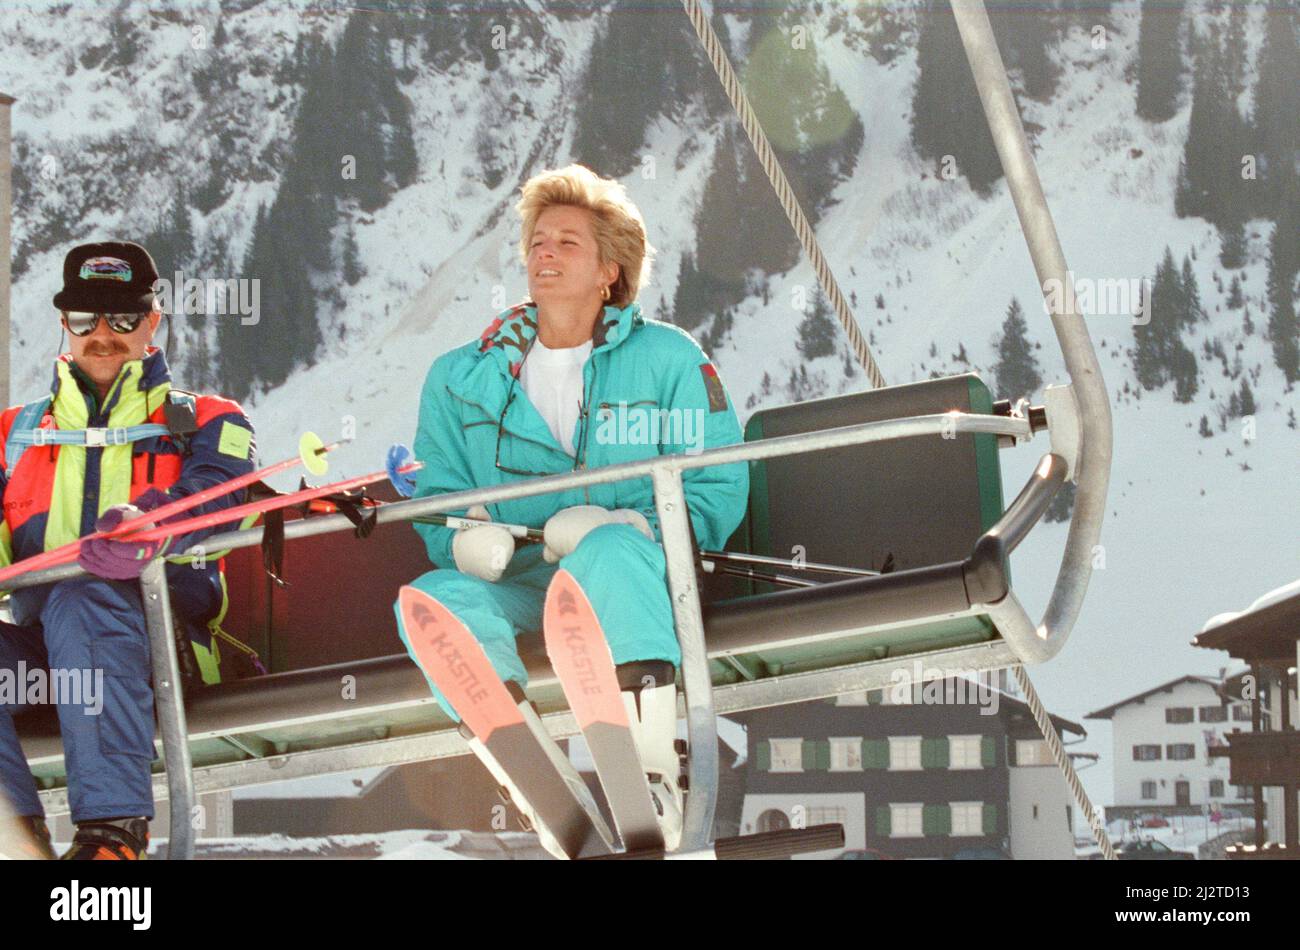 HRH The Princess of Wales, Princess Diana, enjoys a ski holiday in Lech, Austria. Prince William and Prince Harry join her for the trip.  Picture taken 1st April 1993 Stock Photo